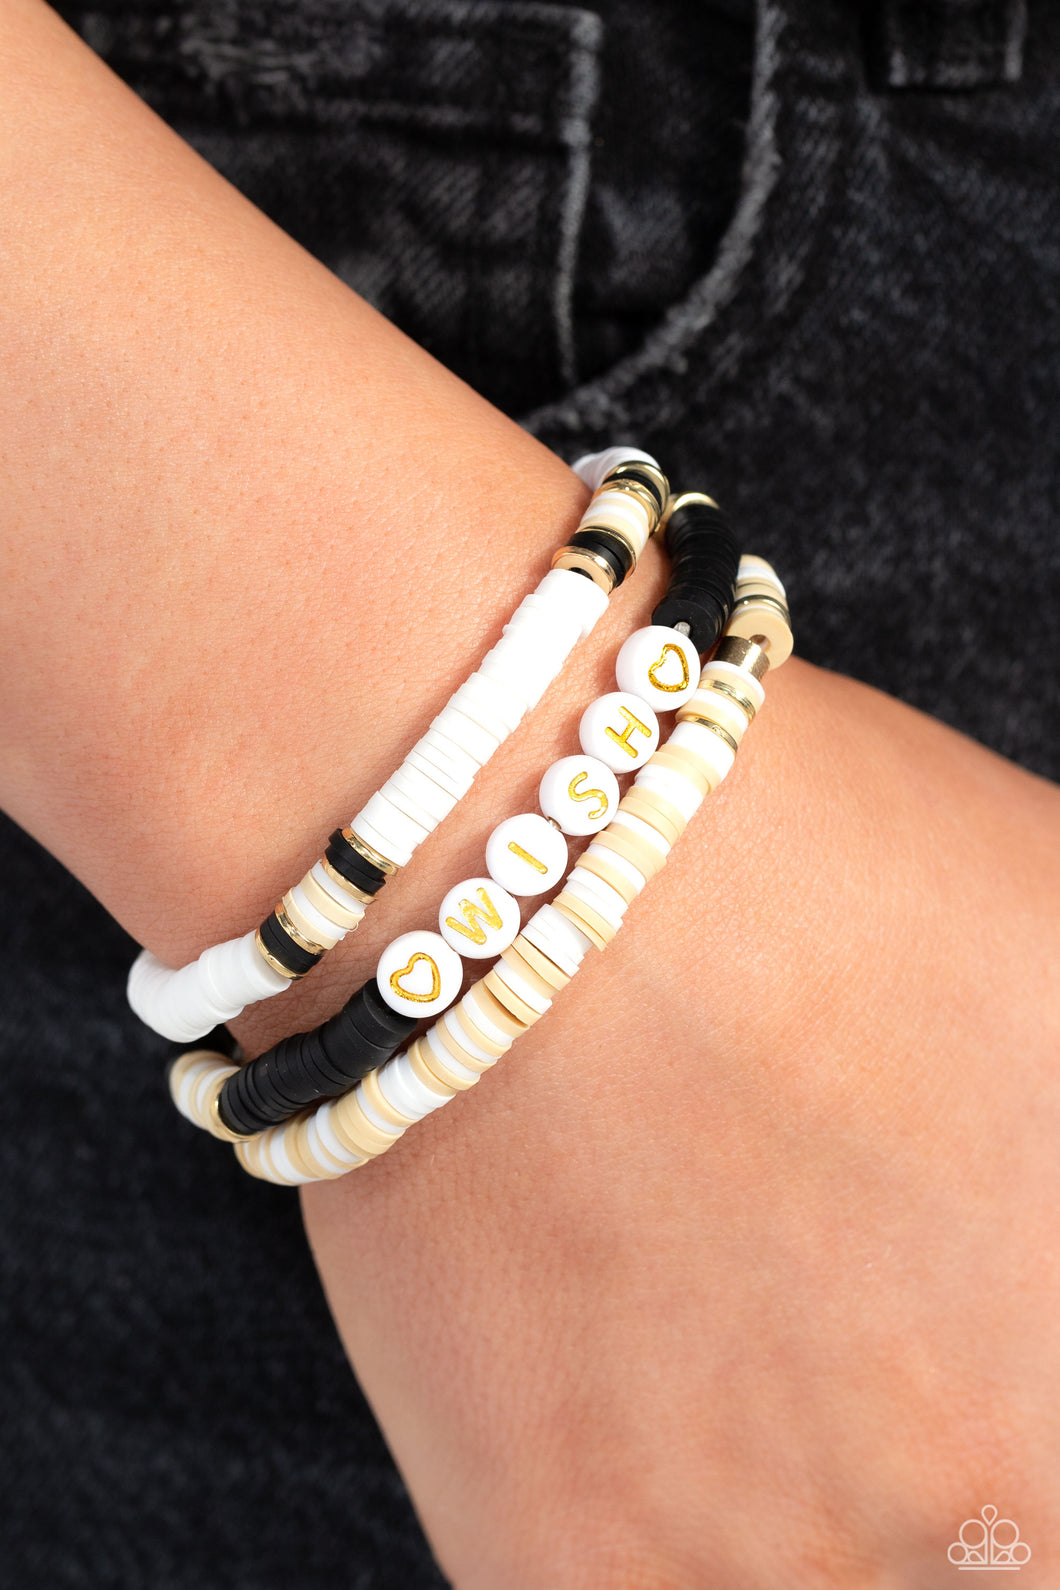 Varying in shades, tan, black, and white clay discs pair with shiny gold disc beads and accents creating layers across the wrist. Featured on one of the bracelets, white beads stamped with gold lettering spell out the word 